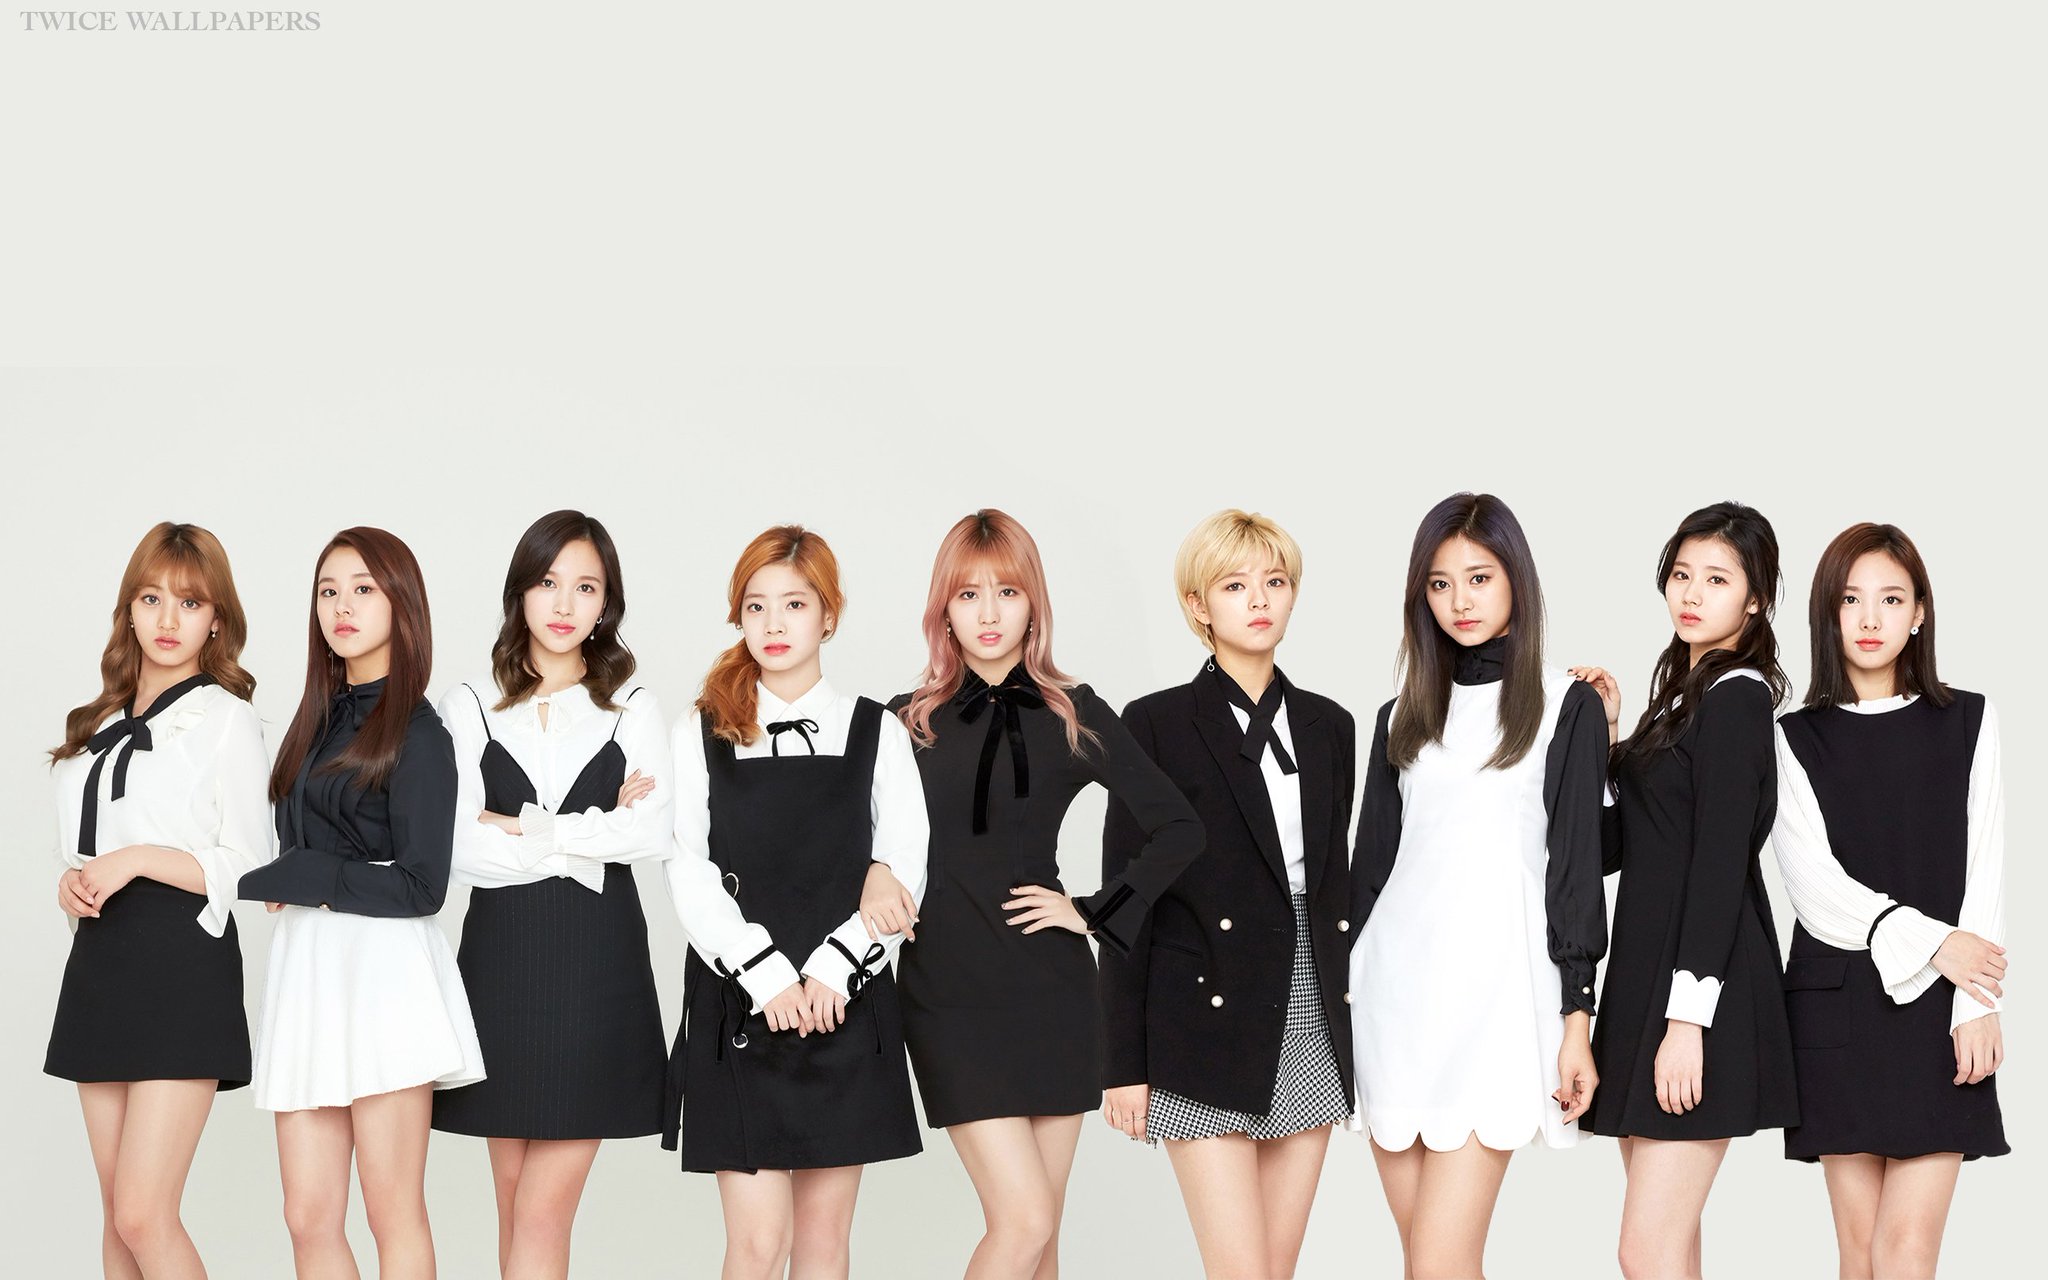 тwιce wallpaperѕ on Twitter: "TWICE X Sudden Attack 1 phone wallpaper and 3 desktop wallpapers # ...